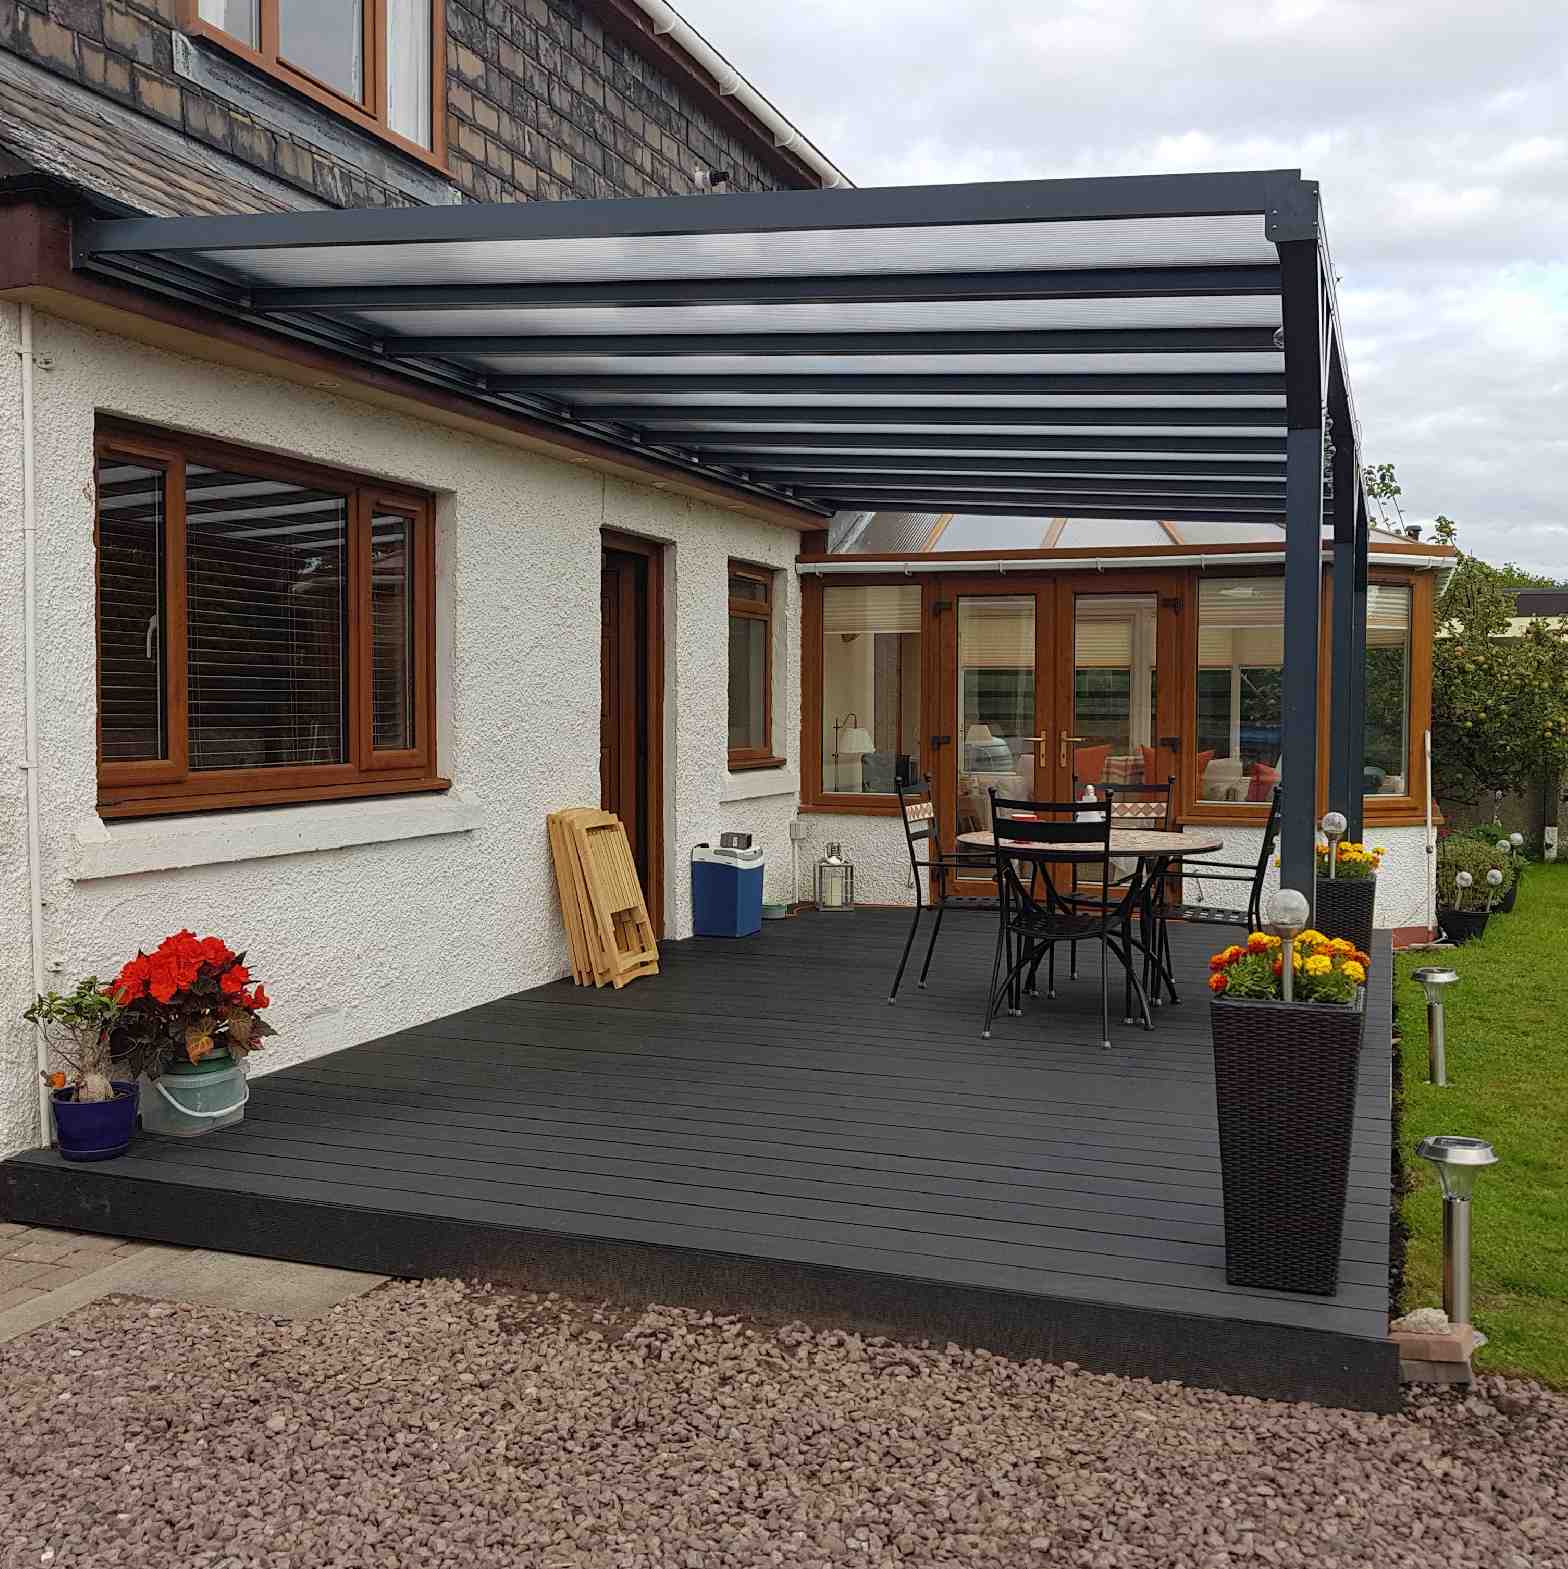 Buy Omega Verandah, Anthracite Grey, 16mm Polycarbonate Glazing - 12.0m (W) x 4.5m (P), (5) Supporting Posts online today